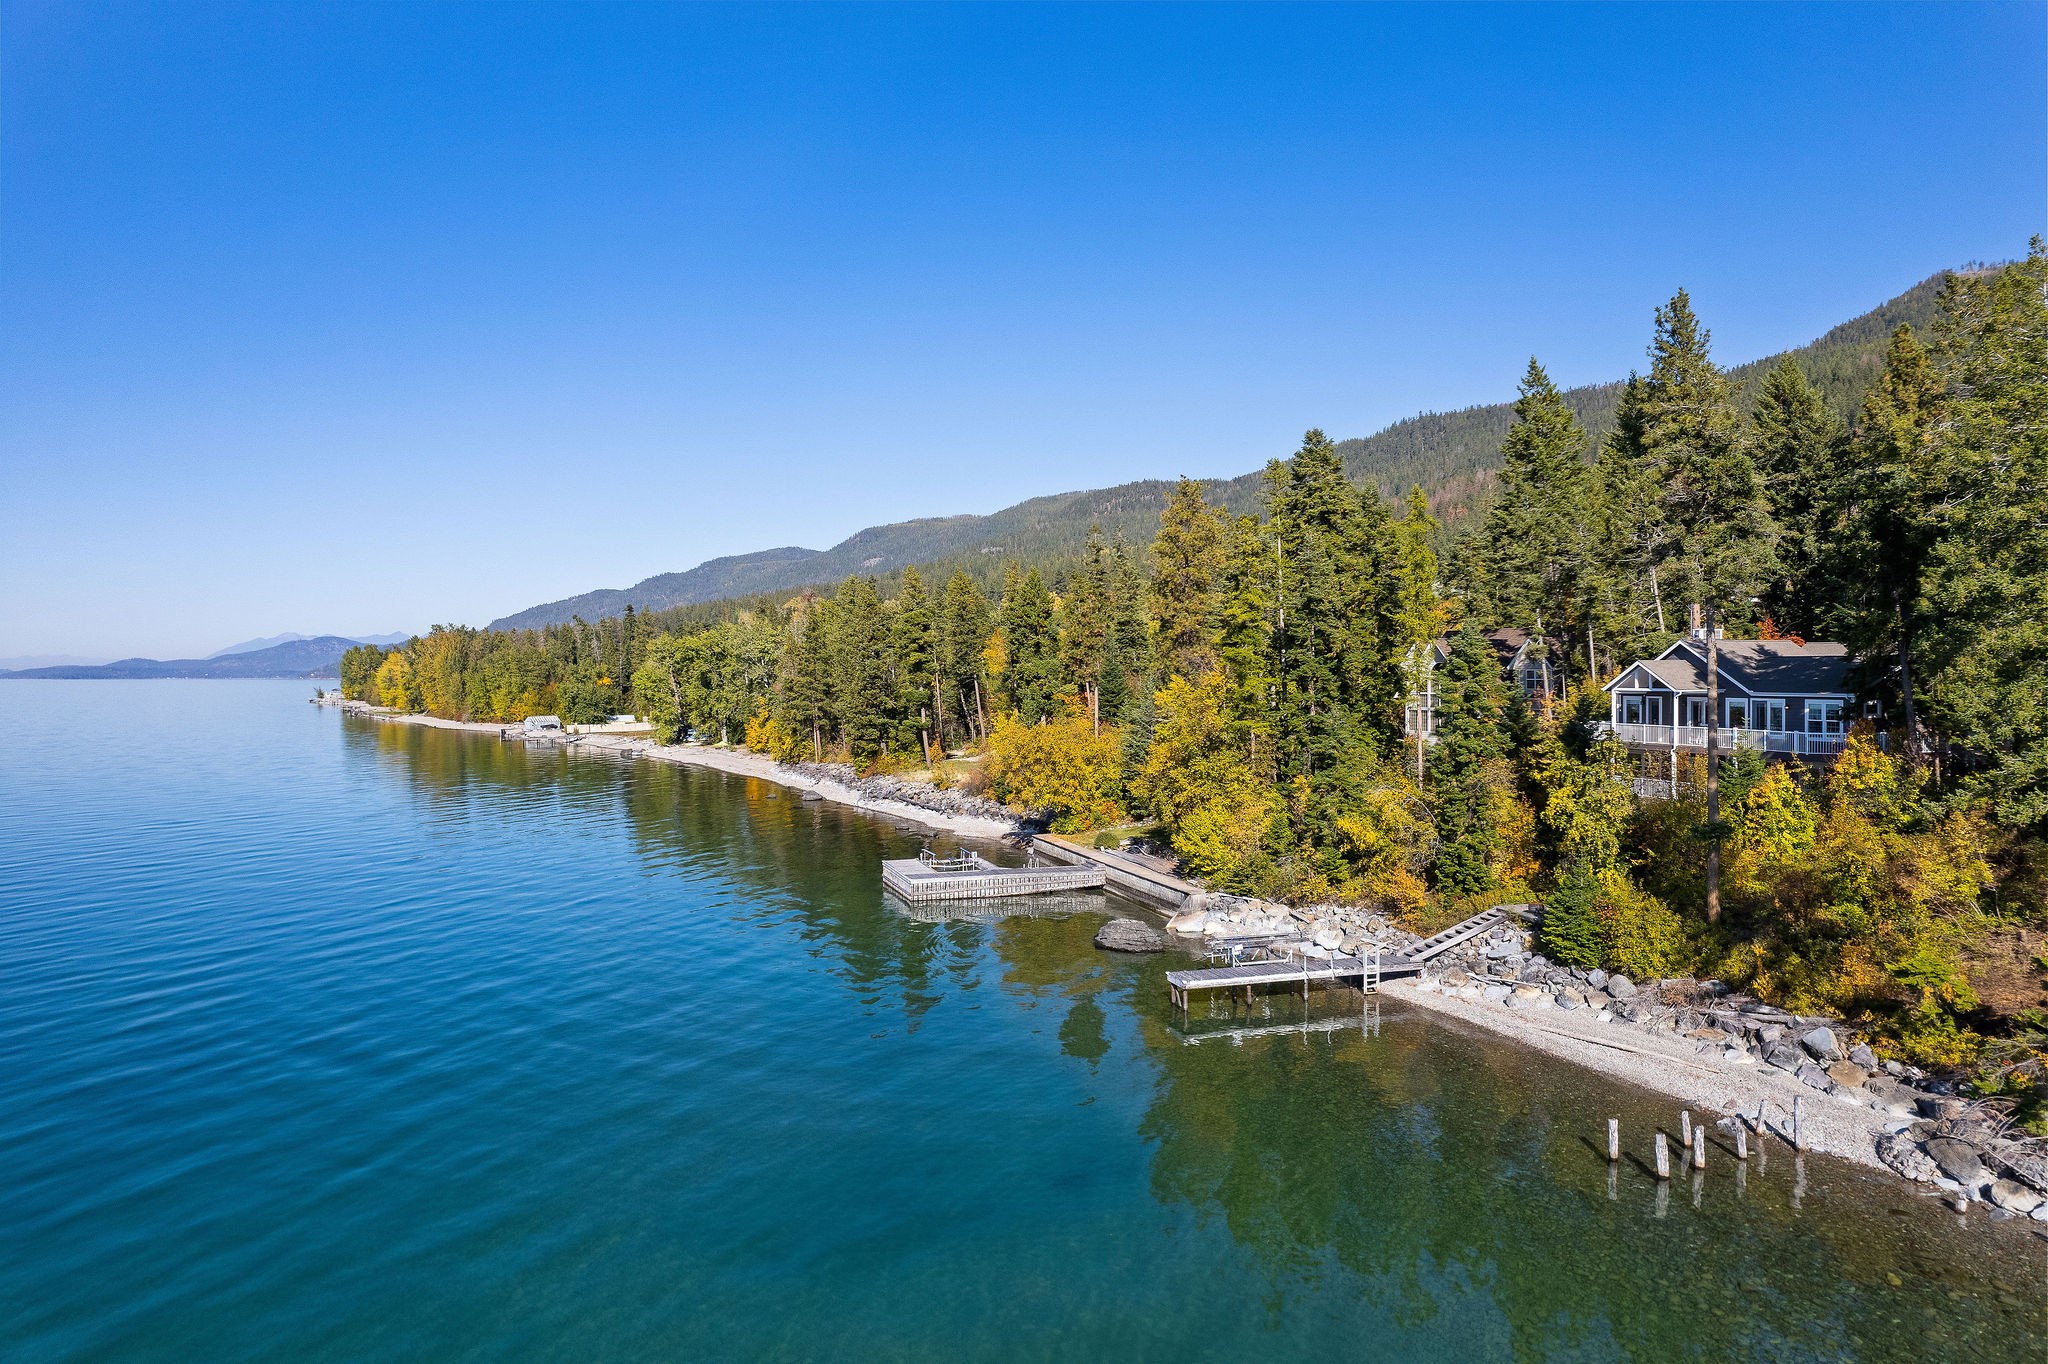 Welcome to this lakefront paradise boasting 100' of prime Flathead Lake frontage and 180 degree Flathead Lake views! This stunning 3BD/3BA custom home boasts no HOA or CCRs & provides you with a 1.38 acre slice of Montana's natural beauty, including breathtaking sunset views over the lake! Enjoy the crystal-clear waters & the ease of lakefront living w/ your own dock & lift station. This spacious 2,635 SF home features high-end custom finishes including granite countertops & knotty alder custom cabinets, doors, & trim; a private elevator, & an ADA-compliant lower-level bathroom. The lot provides ample space for outdoor activities, gatherings, additional structures, and RV parking. Don't miss this opportunity to own a lakeside retreat w/ all the modern comforts you desire. Minutes to downtown Bigfork! See Feature Sheet in docs. Swan Lake, Glacier National Park, Whitefish Resort, and Jewel Basin Hiking area nearby. Call Jennifer Shelley at 406.249.8929, or your real estate professional.